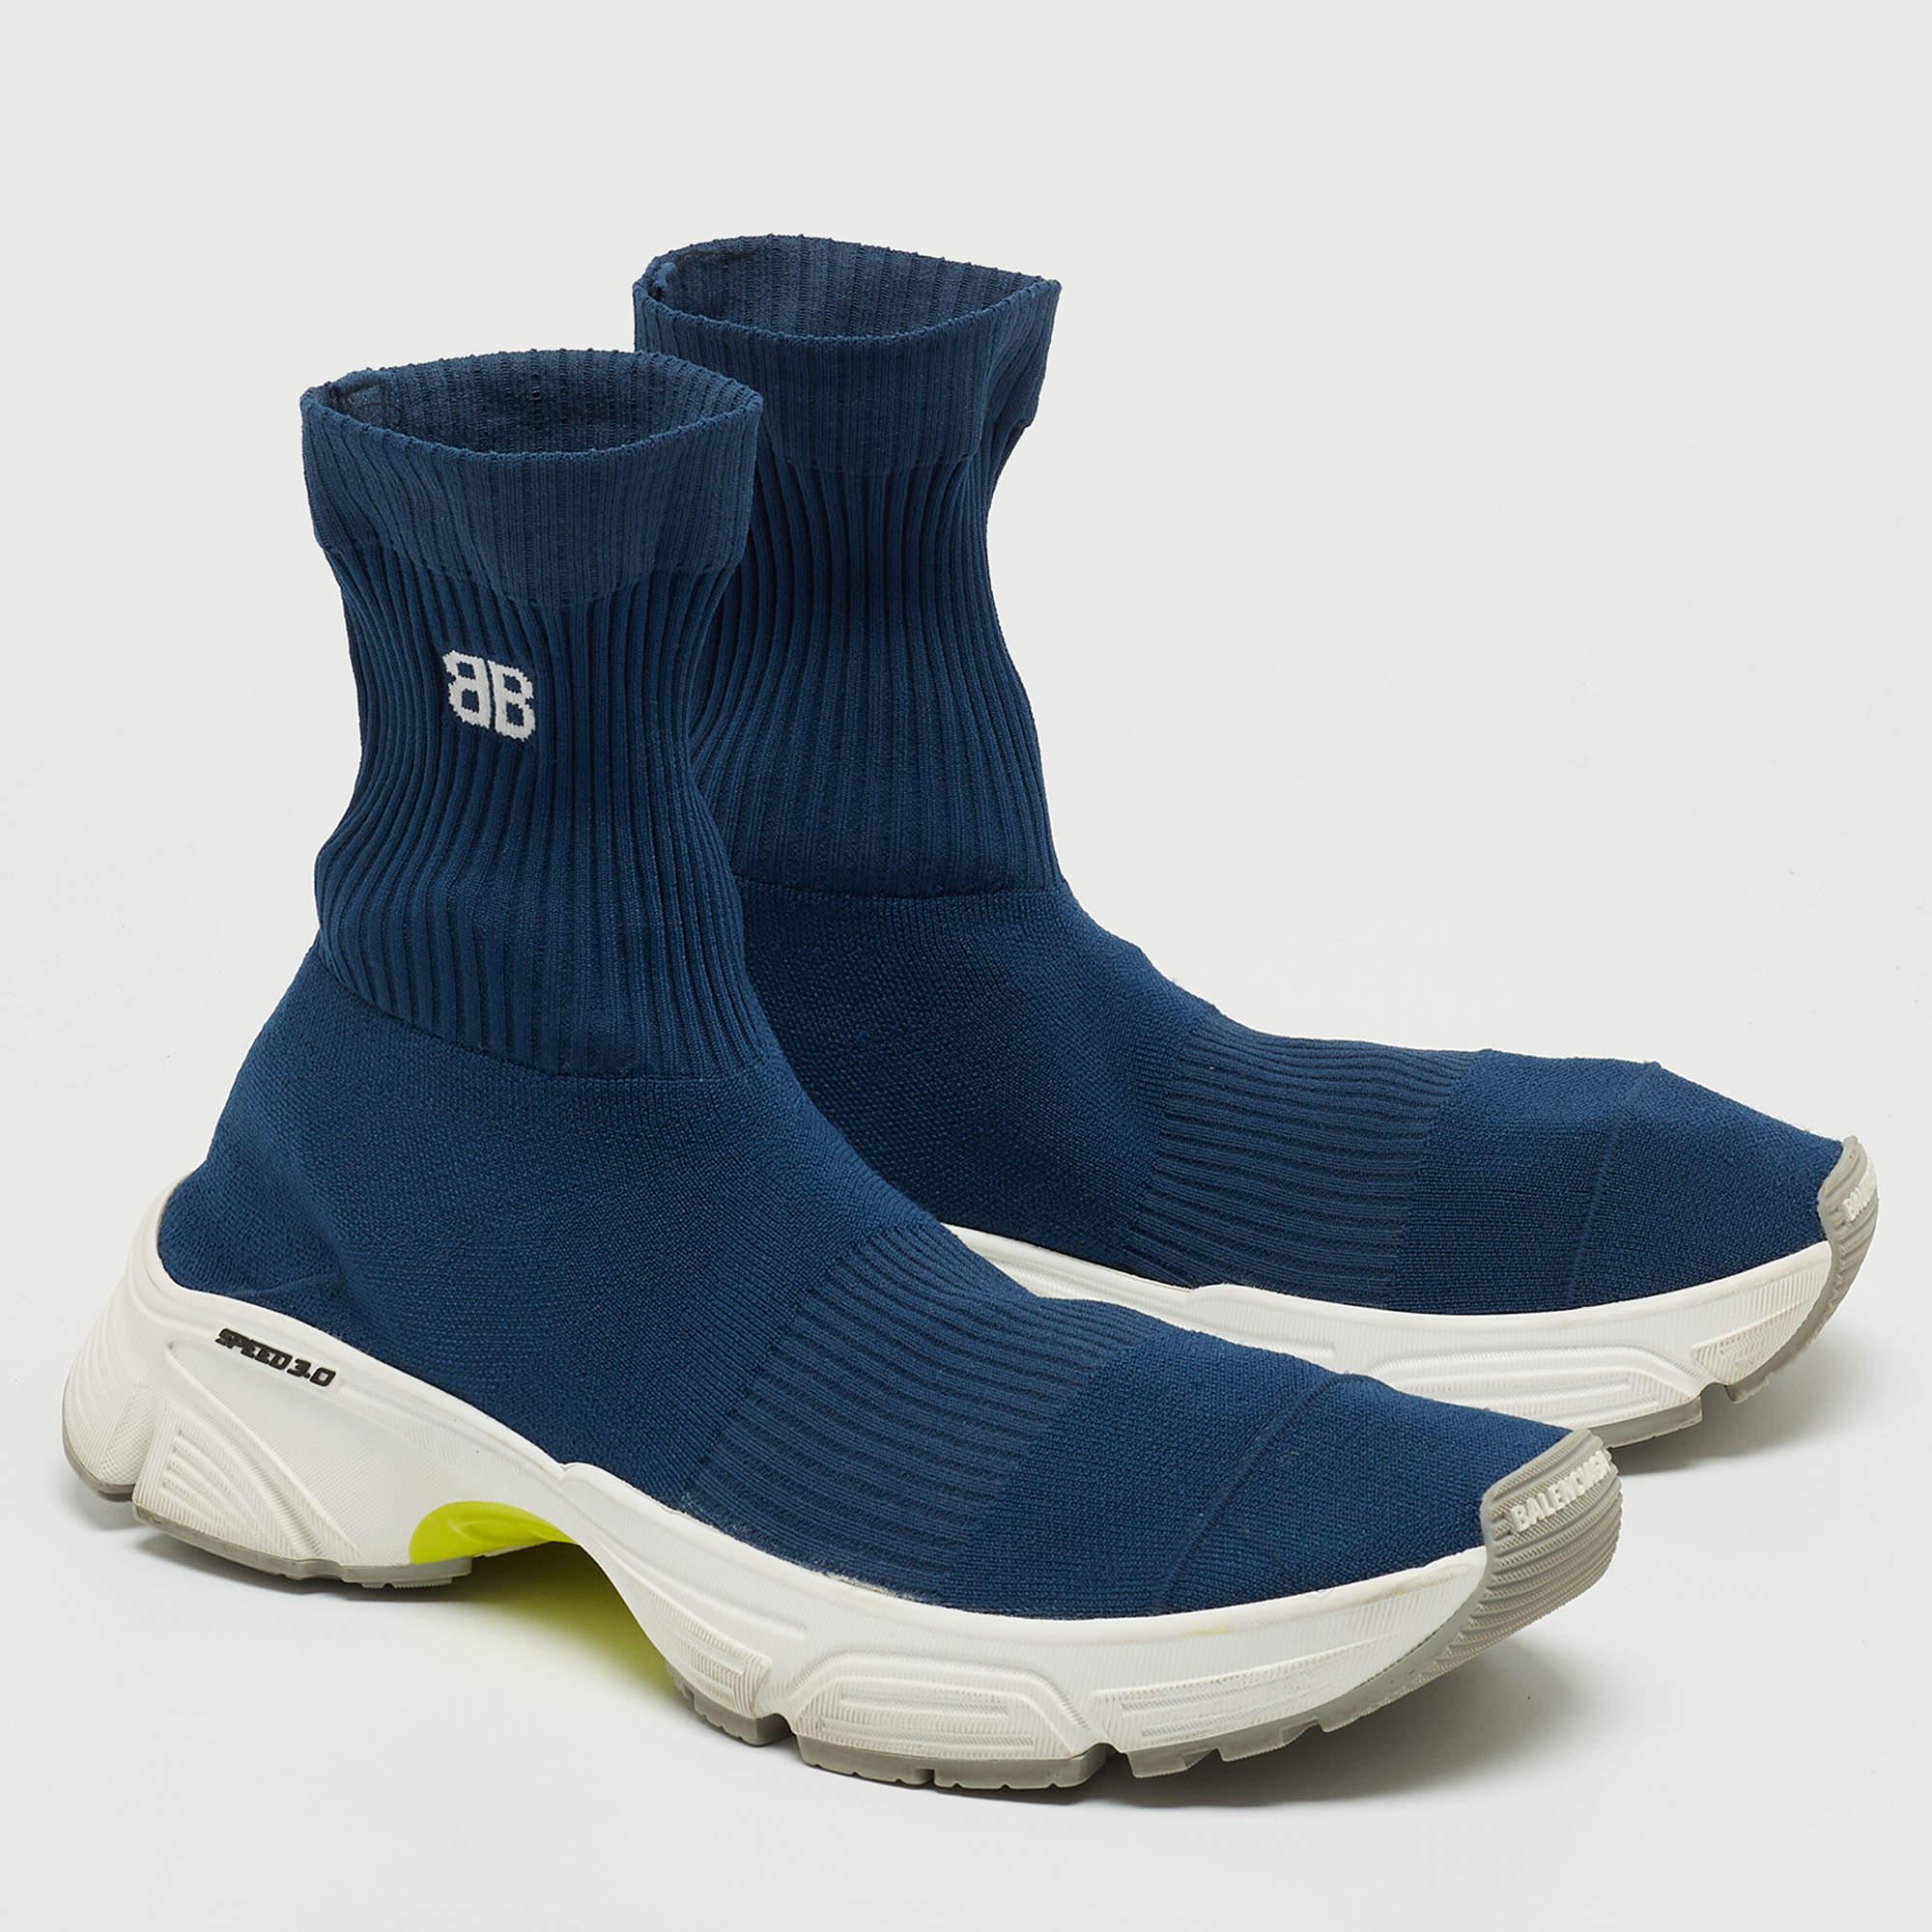 Men's Balenciaga Blue Knit Fabric Speed Trainer Sneakers 